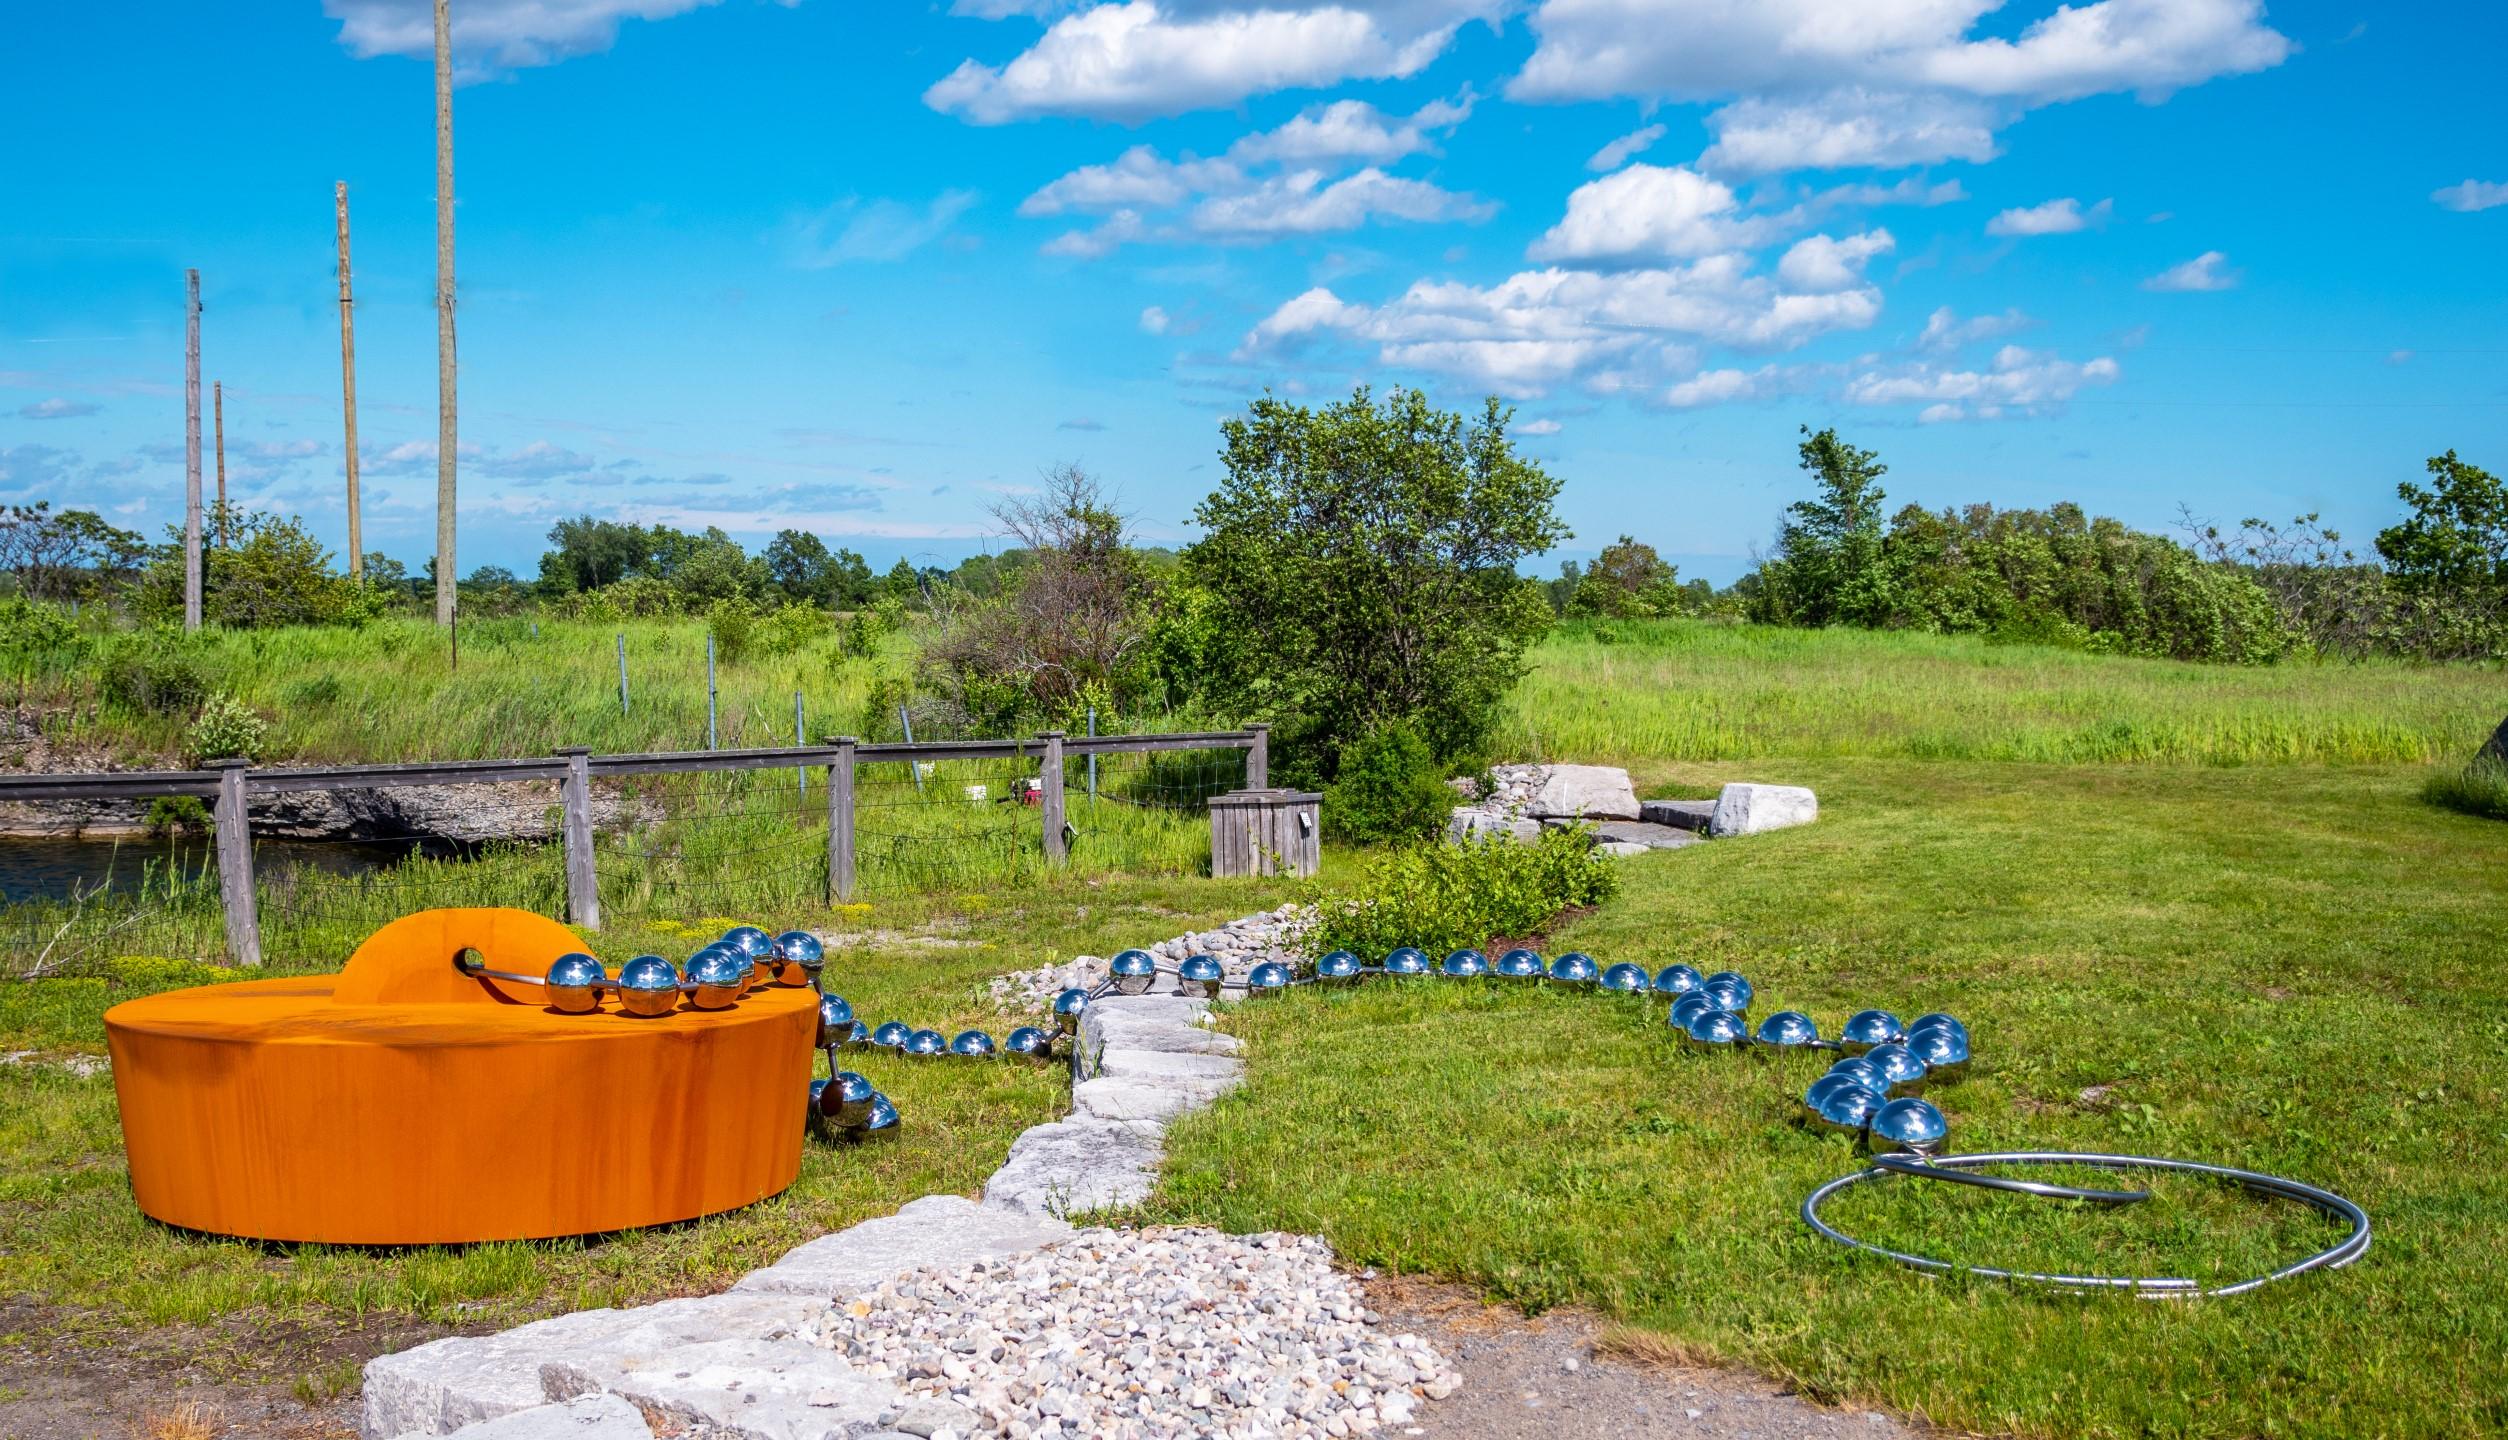 We have just installed Floyd Elzinga's playful and Pop art inspired outdoor sculpture Drain the Swamp next to the water feature on our property. The super sized corten steel replica of a rubber bath stopper is attached to a polished stainless steel